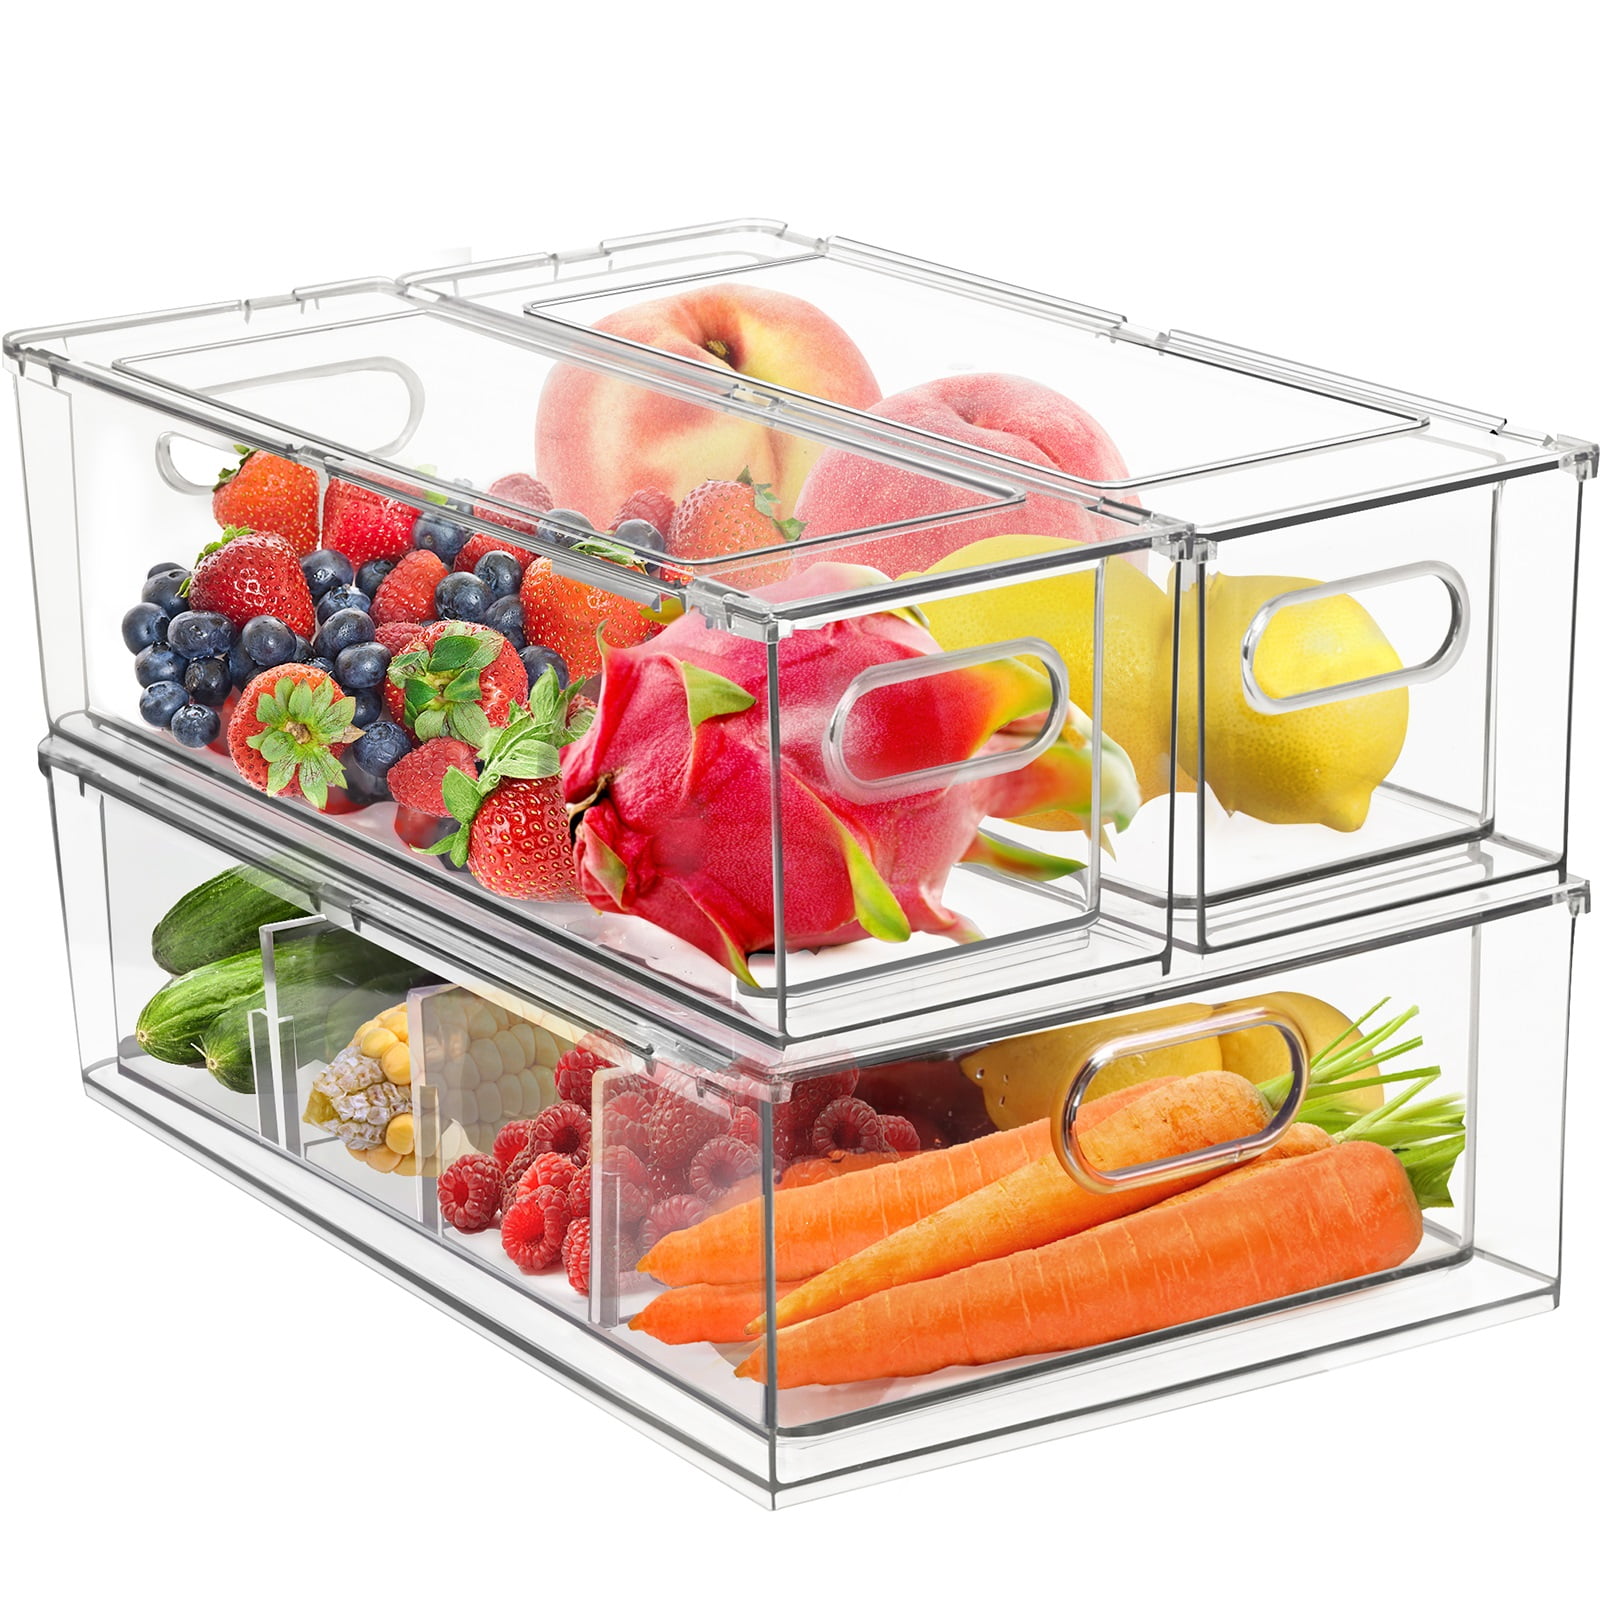 Fridge Drawers - Clear Plastic Stackable Pull-Out Refrigerator Organizer  Bins - Food Storage Containers for Kitchen, Refrigerato - AliExpress